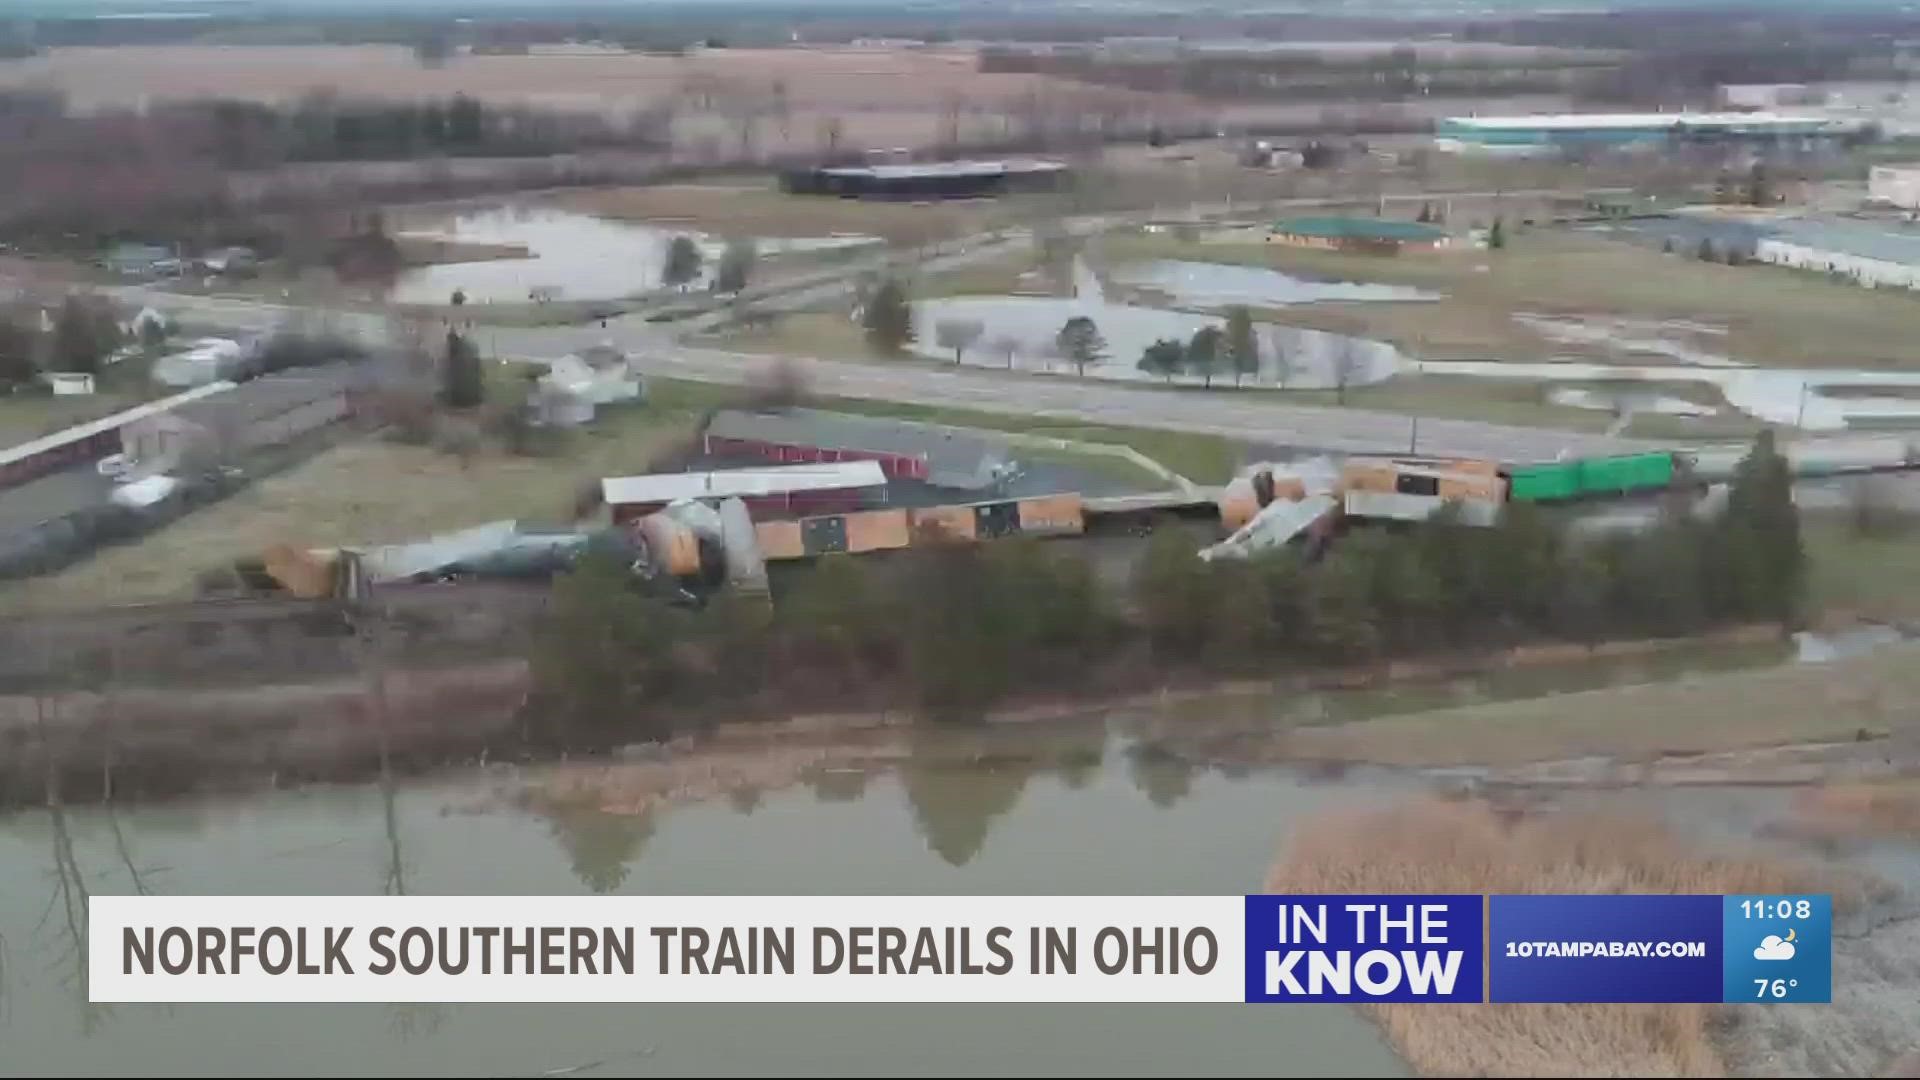 The incident is the second derailment of the company’s trains in Ohio in a month, officials said.